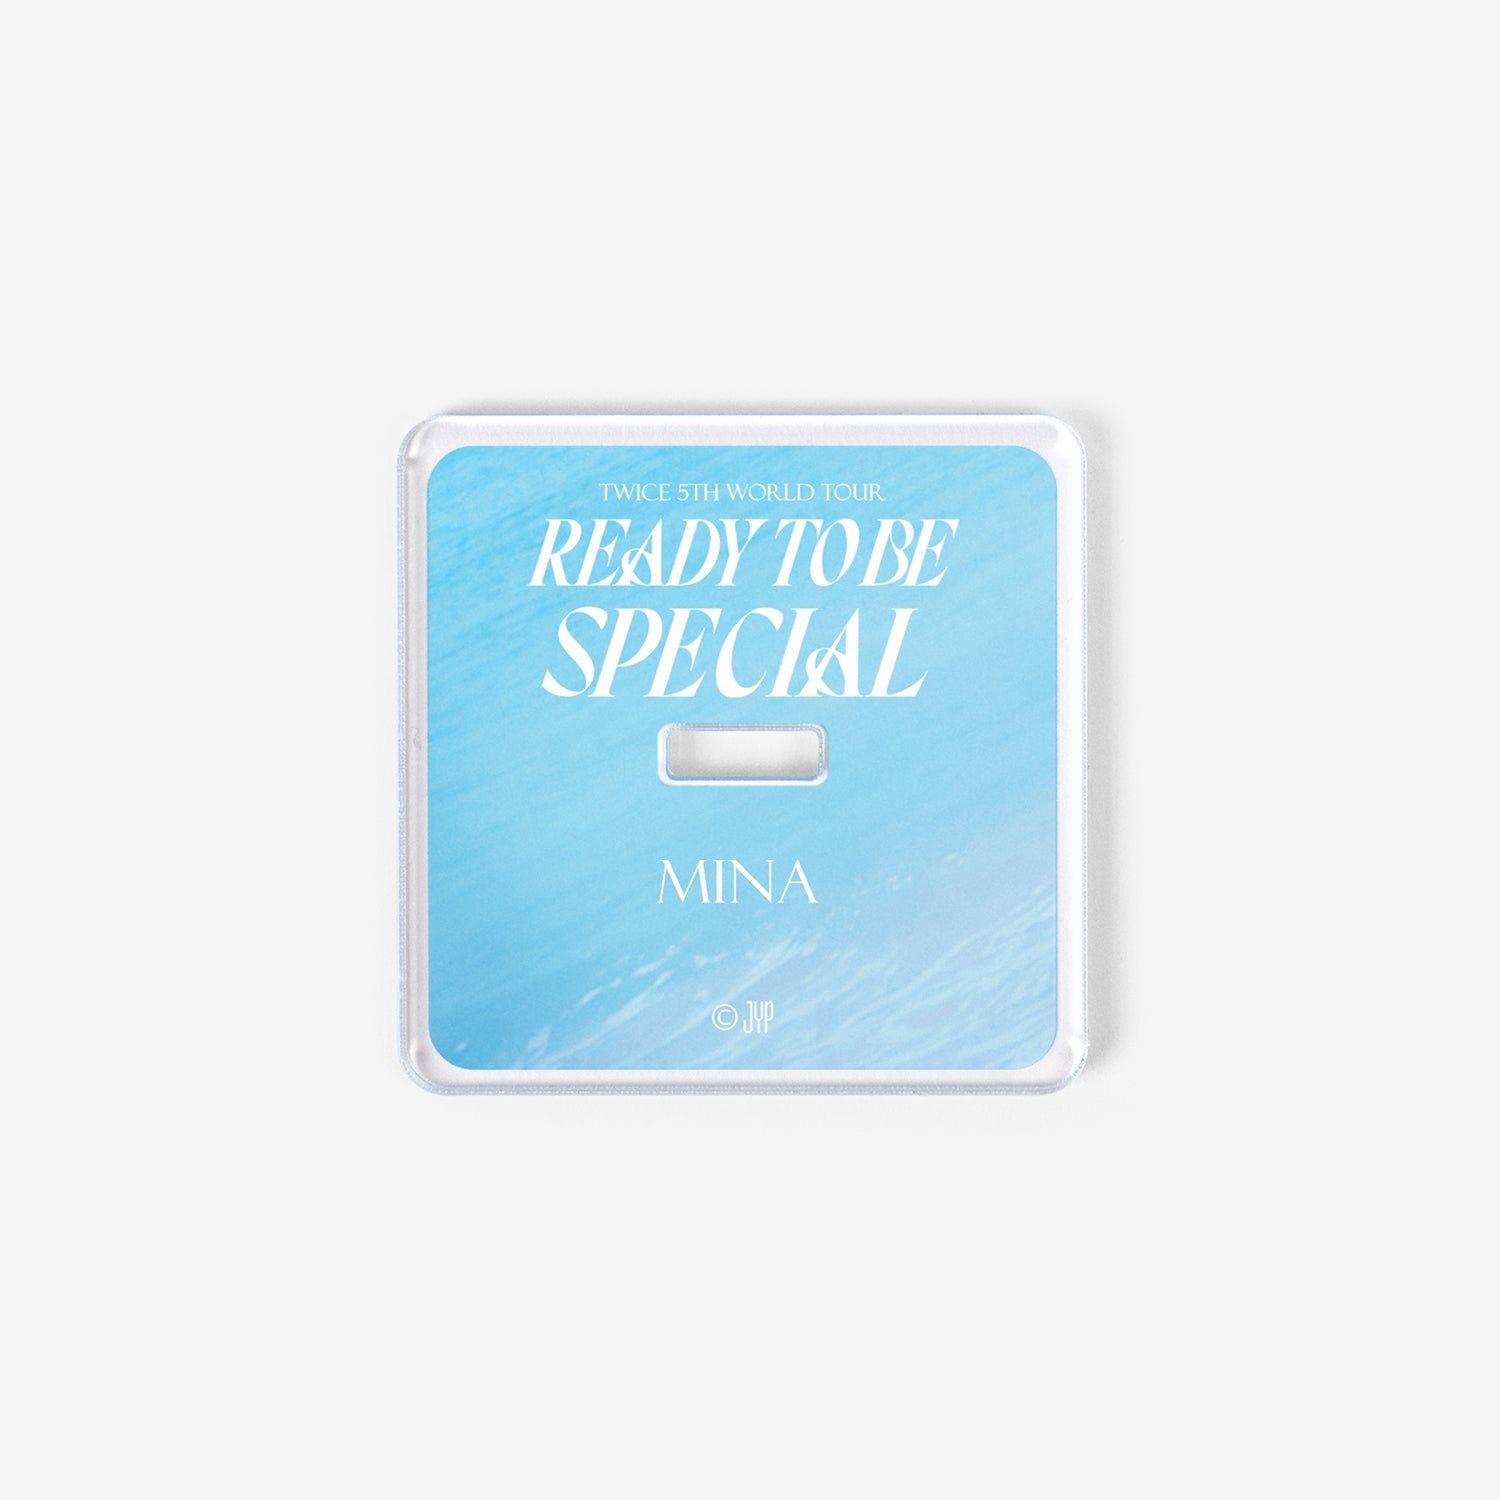 ACRYLIC STAND - MINA【SPECIAL】/ TWICE『READY TO BE SPECIAL』